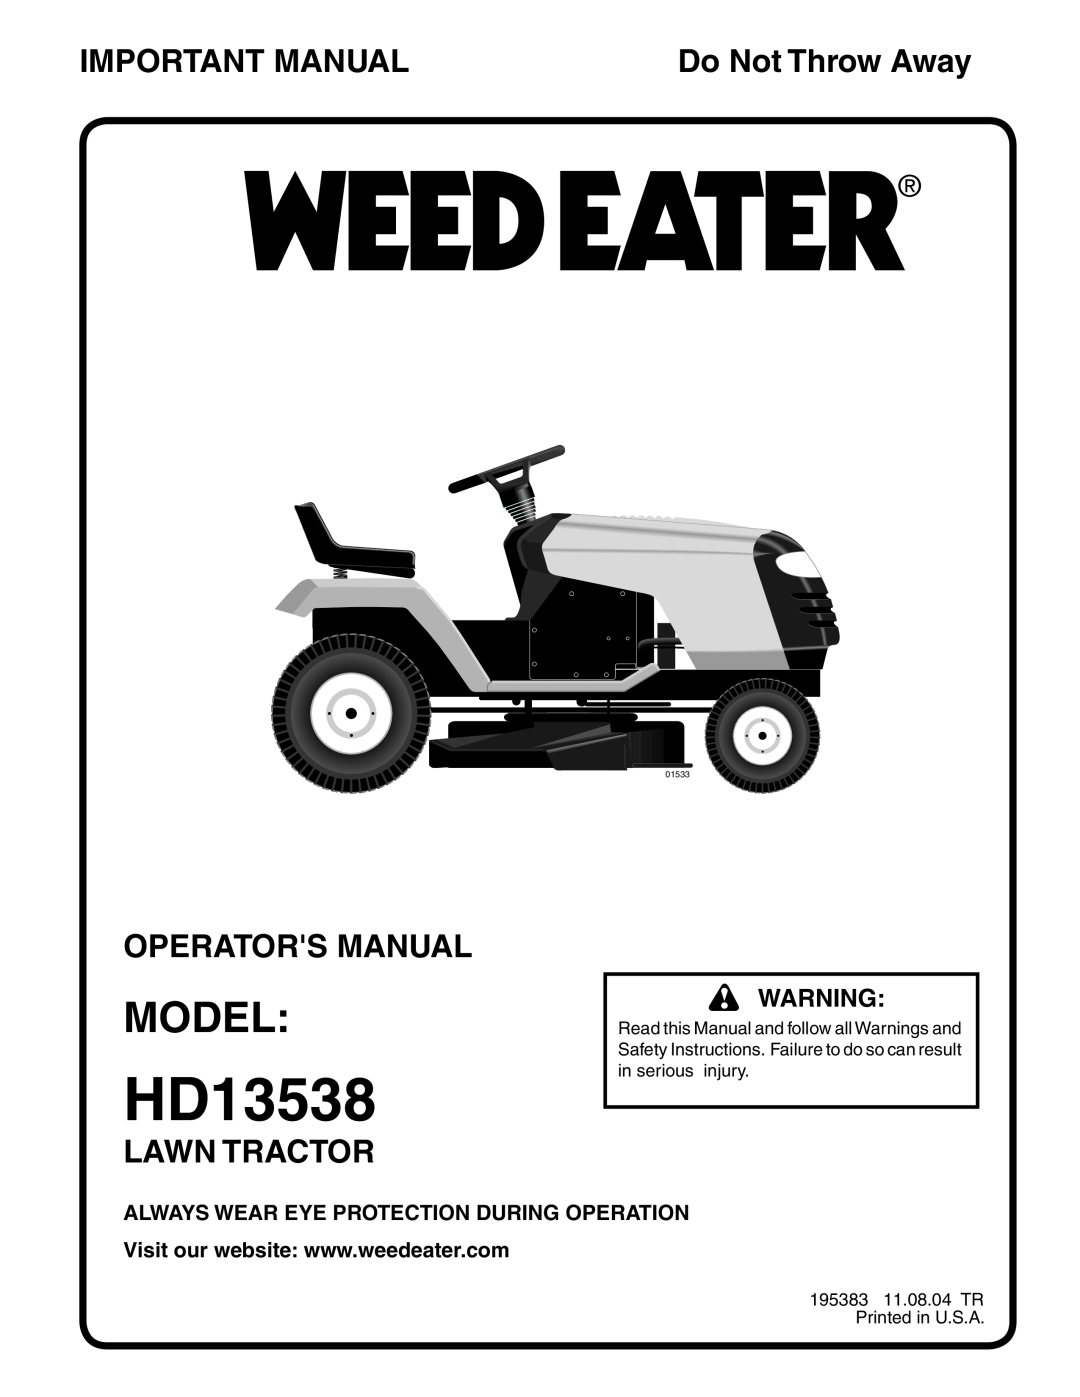 Weed Eater 96016000100 manual Model, Important Manual, Operators Manual, Lawn Tractor, HD13538, Do Not Throw Away, 01533 